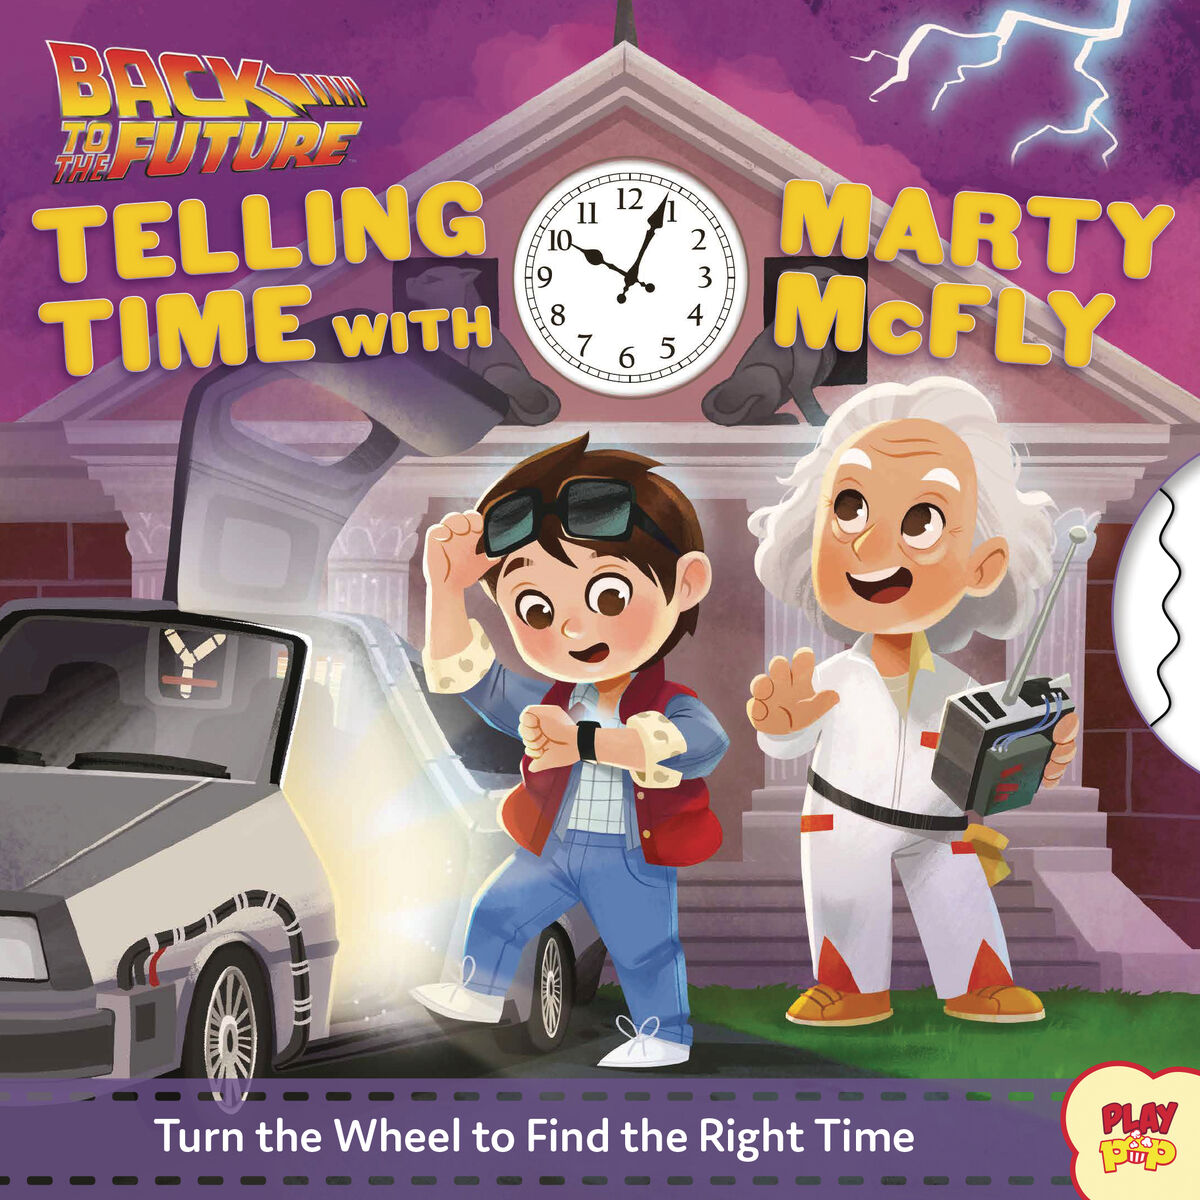 Tell the future. Назад в будущее книга. Back of the Future книга. Back to the Future book telling time with Marty MCFLY. Back to the Future back to time.